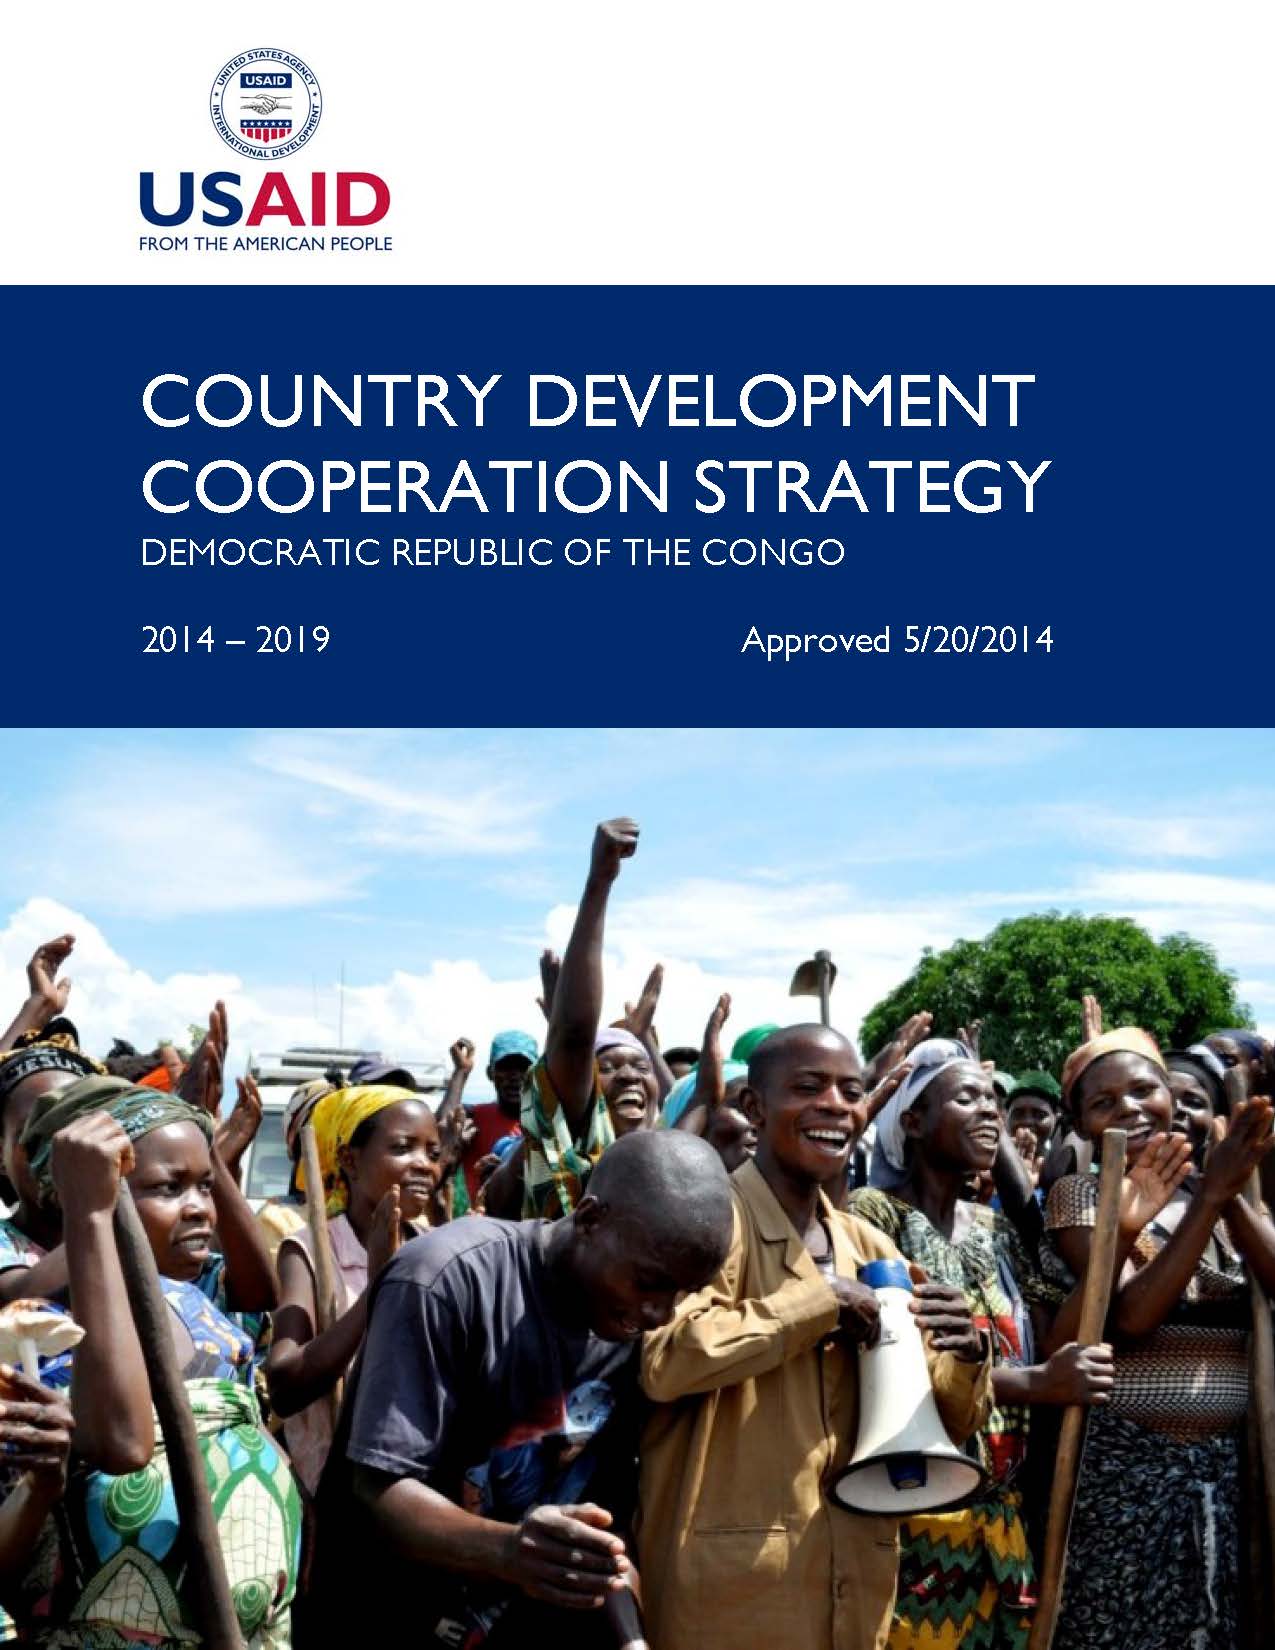 USAID/DRC Country Development Cooperation Strategy for 2015 - 2019